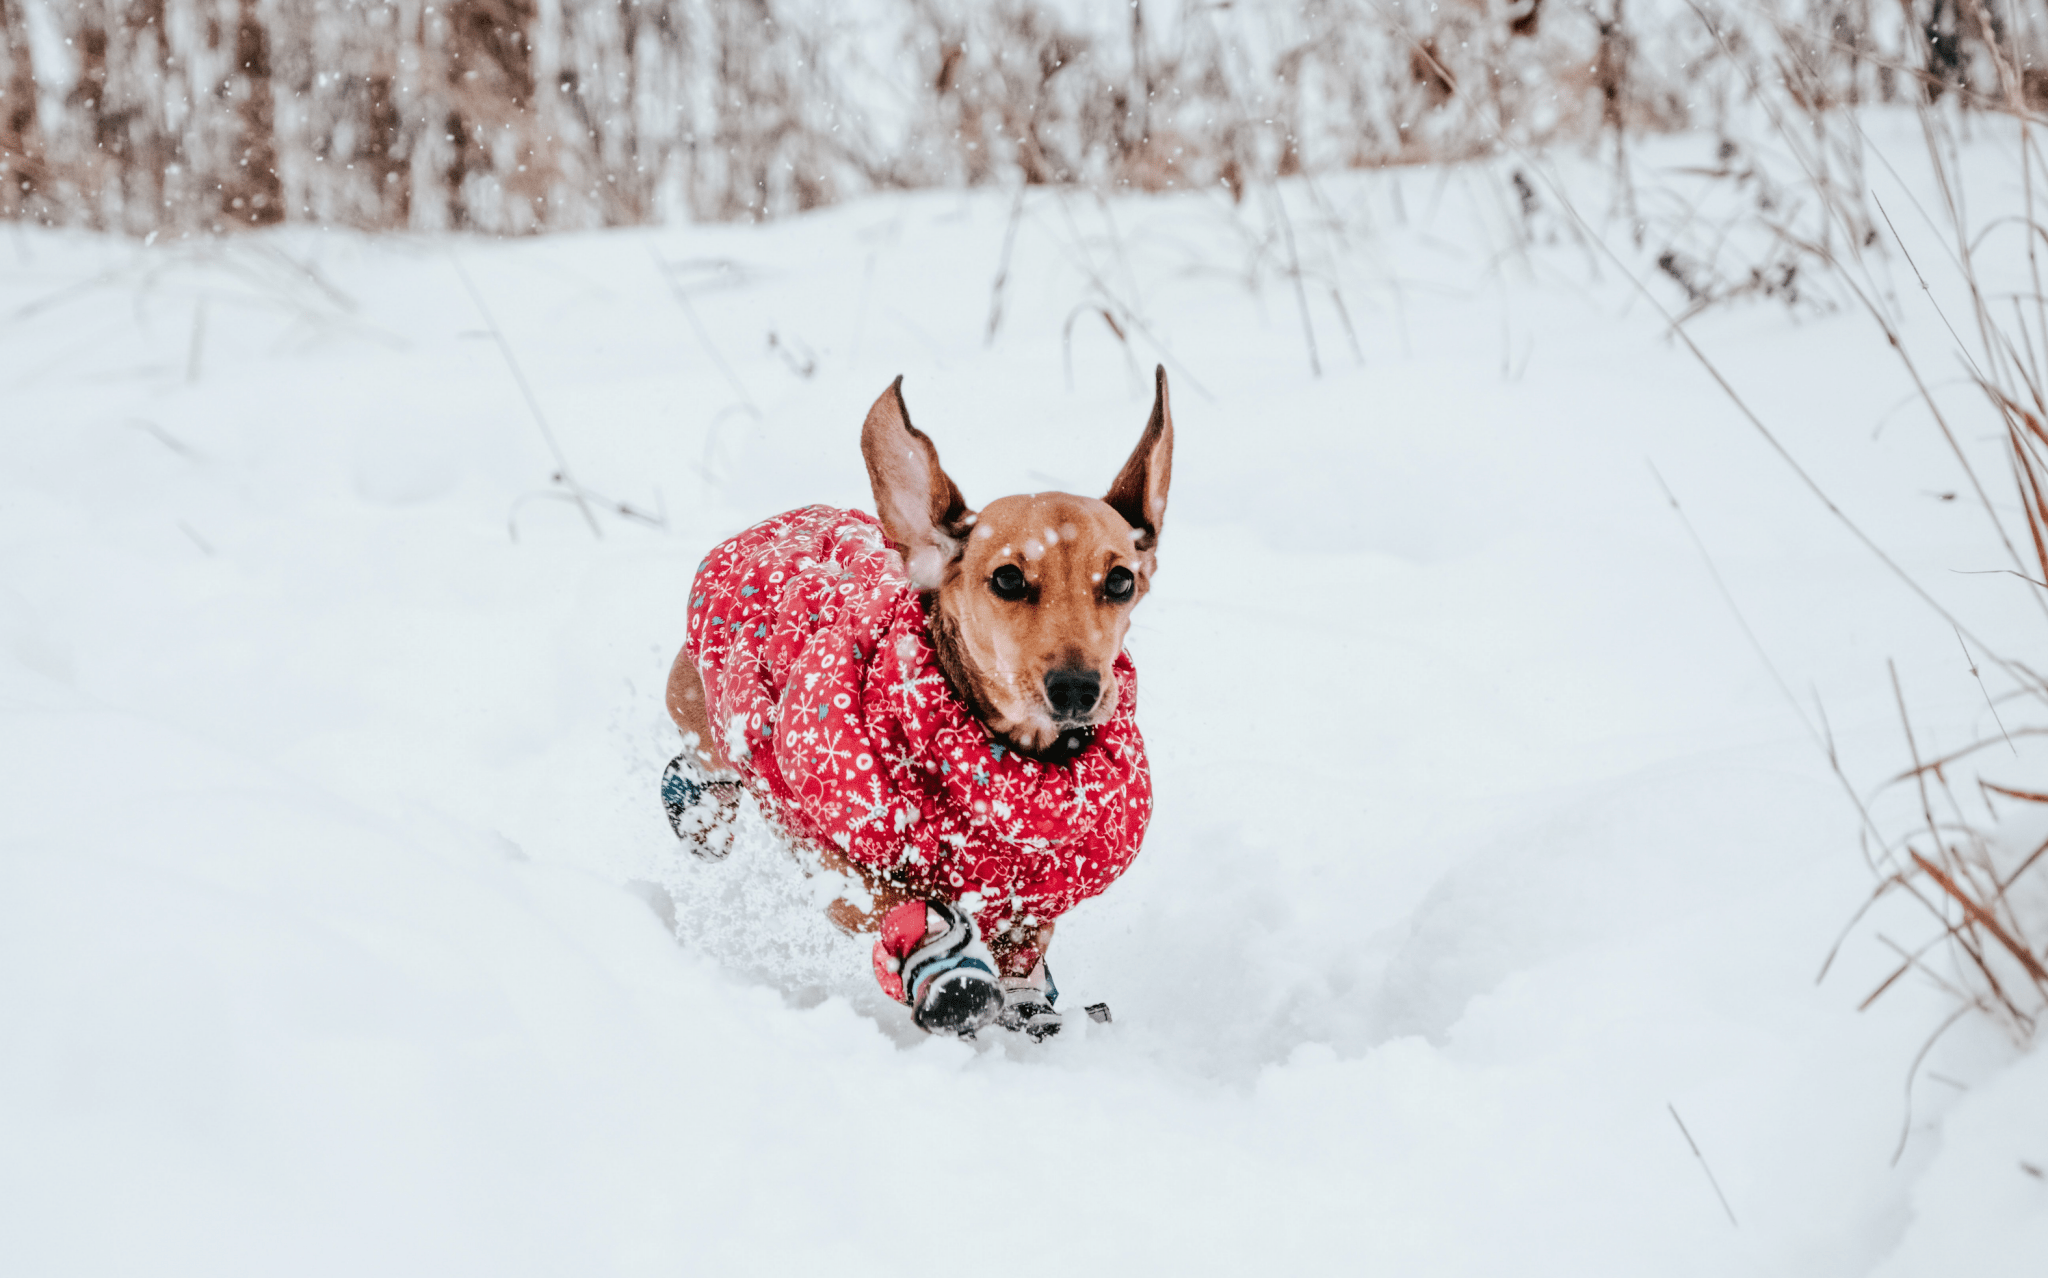 5 Essential Tips to Keep Dogs Safe in Cold Weather